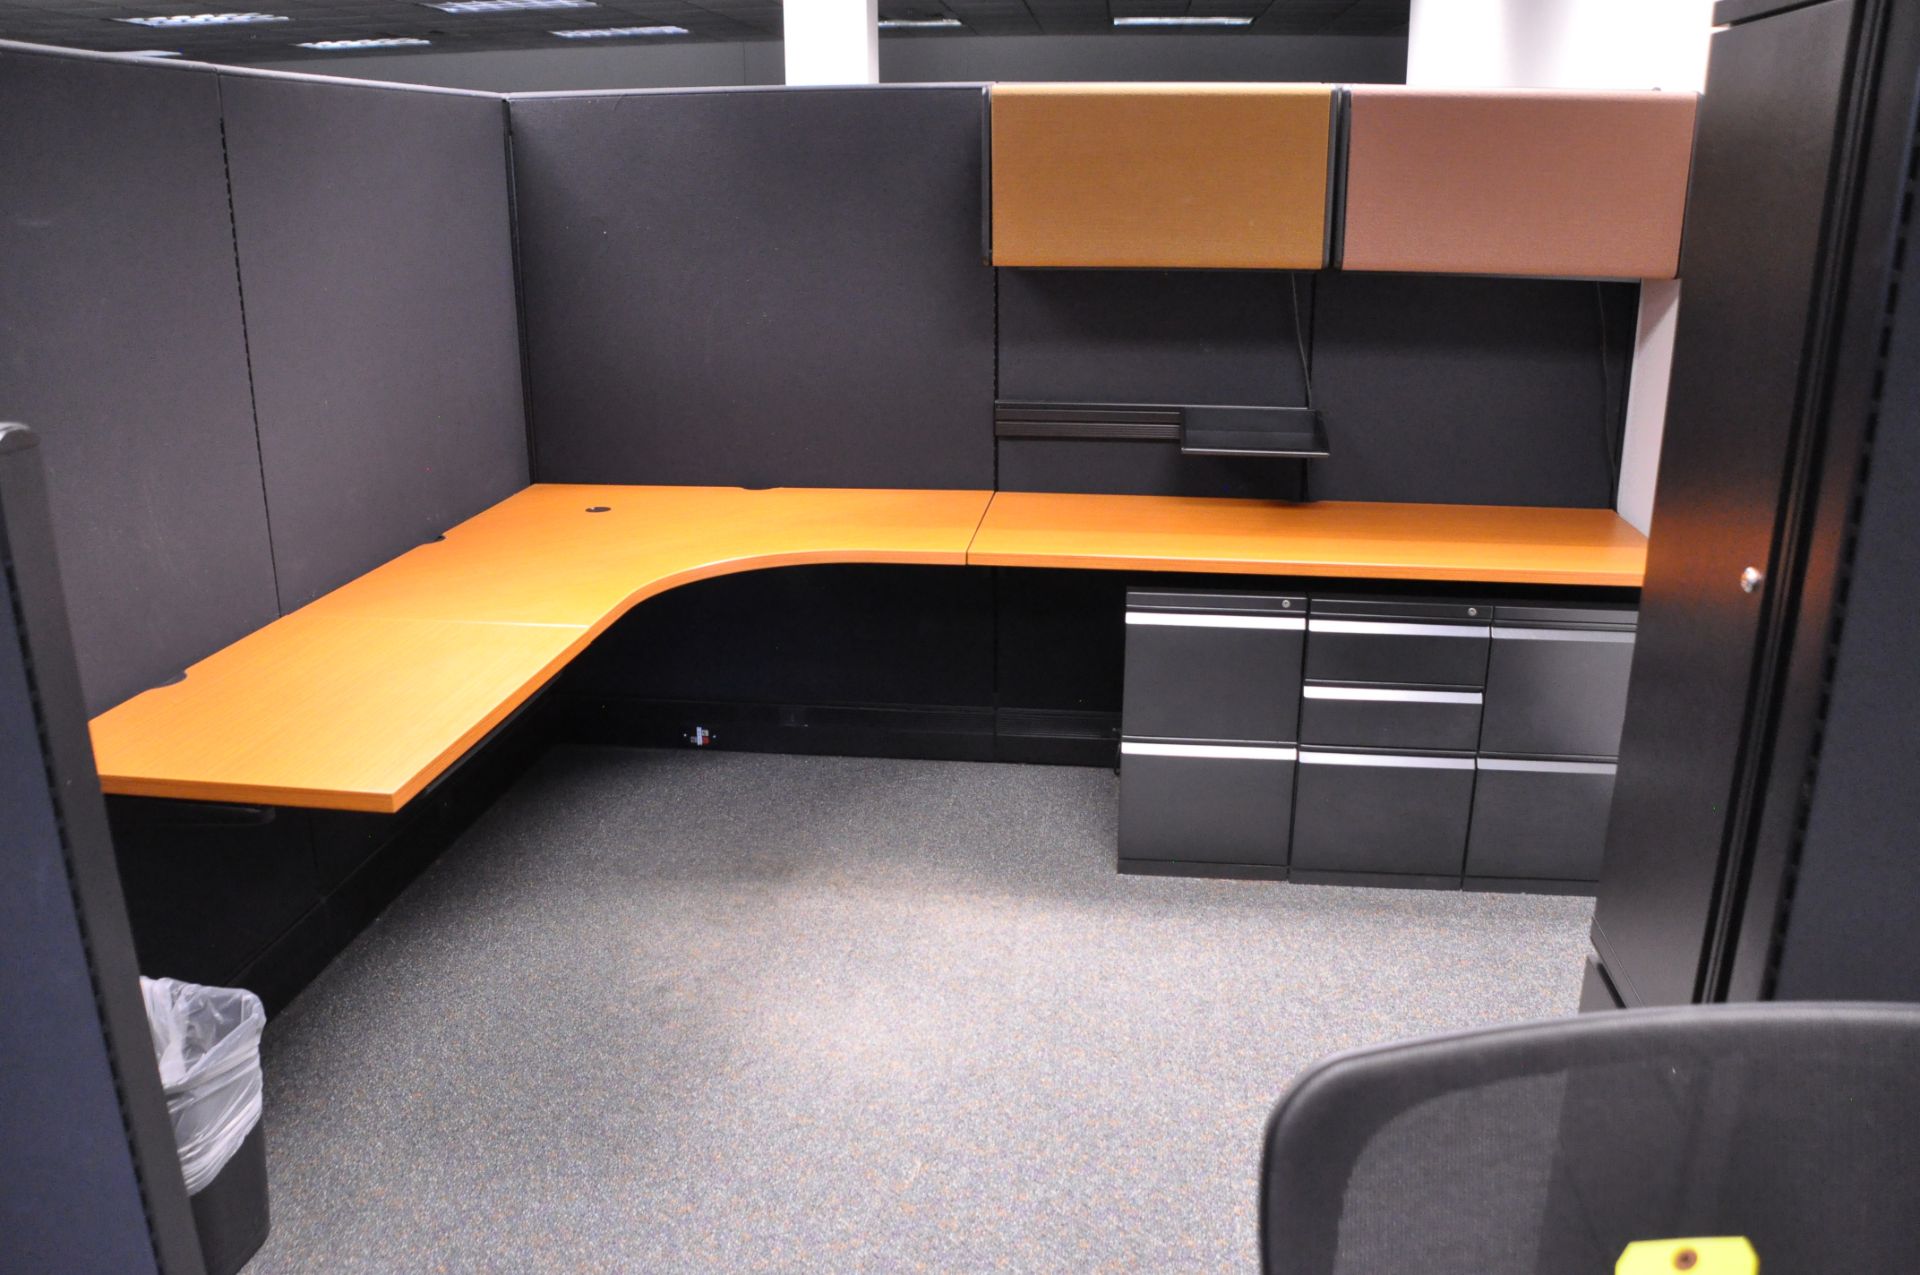 Lot-(1) Herman Miller 6-Station Cubicle Partition Work System with Standing Cabinets and Partition - Image 3 of 10